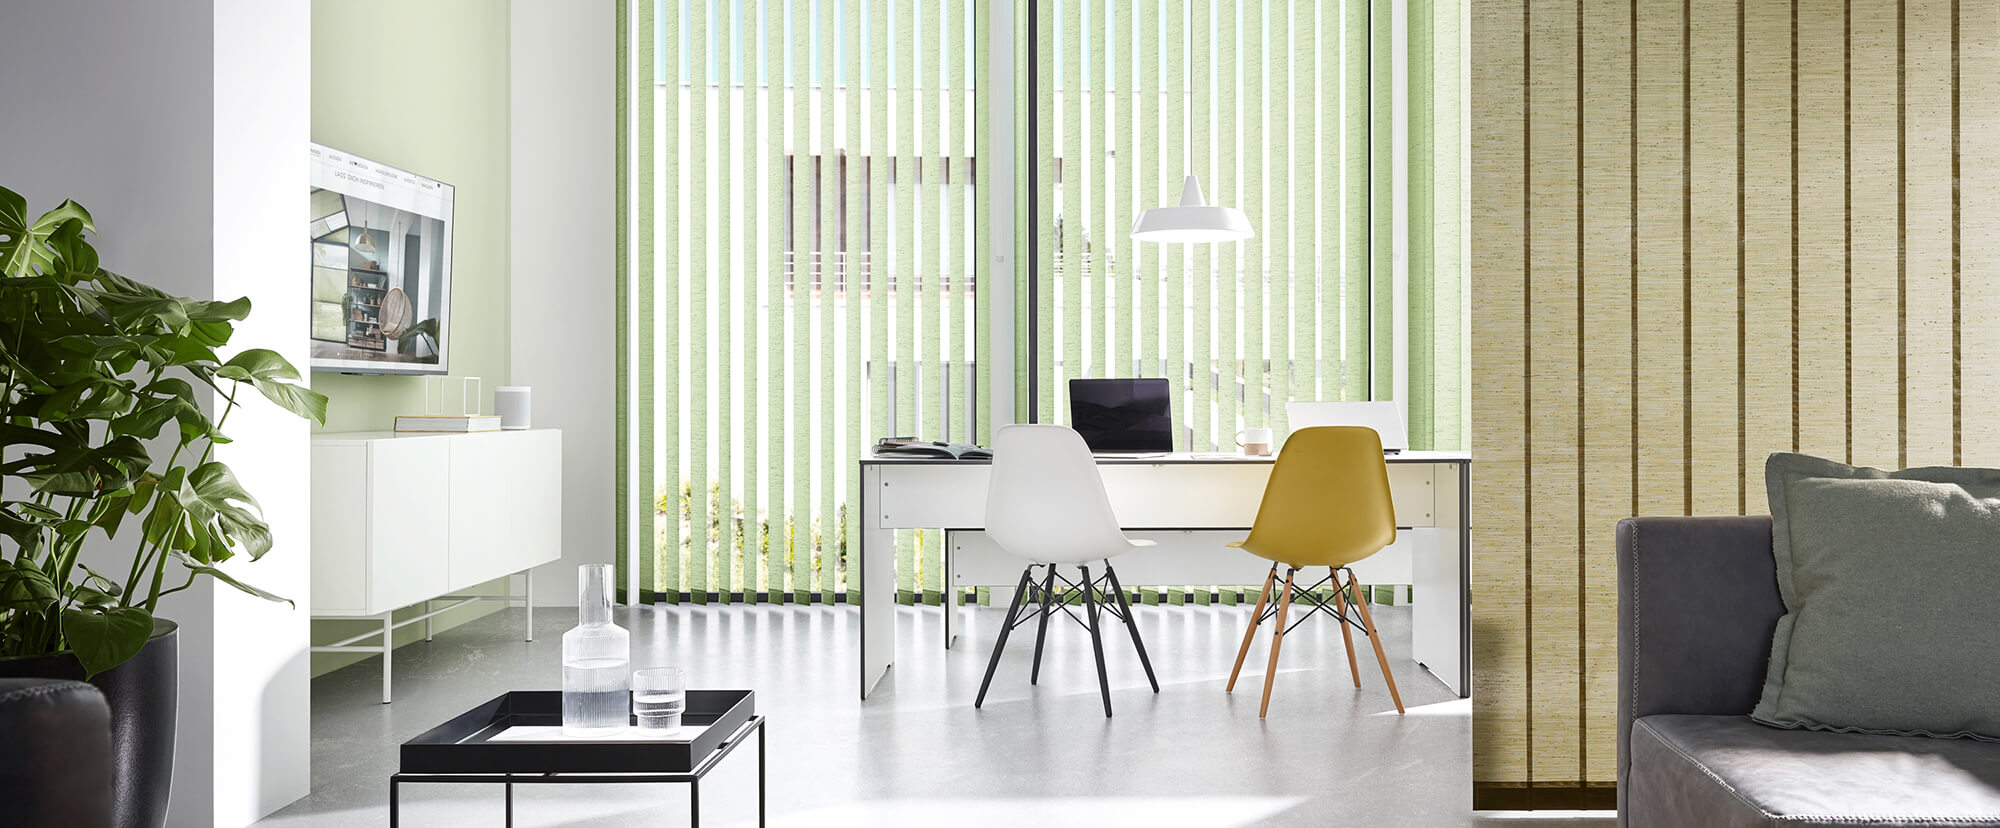 Kadeco vertical blinds are an eye-catcher at the window and in the room